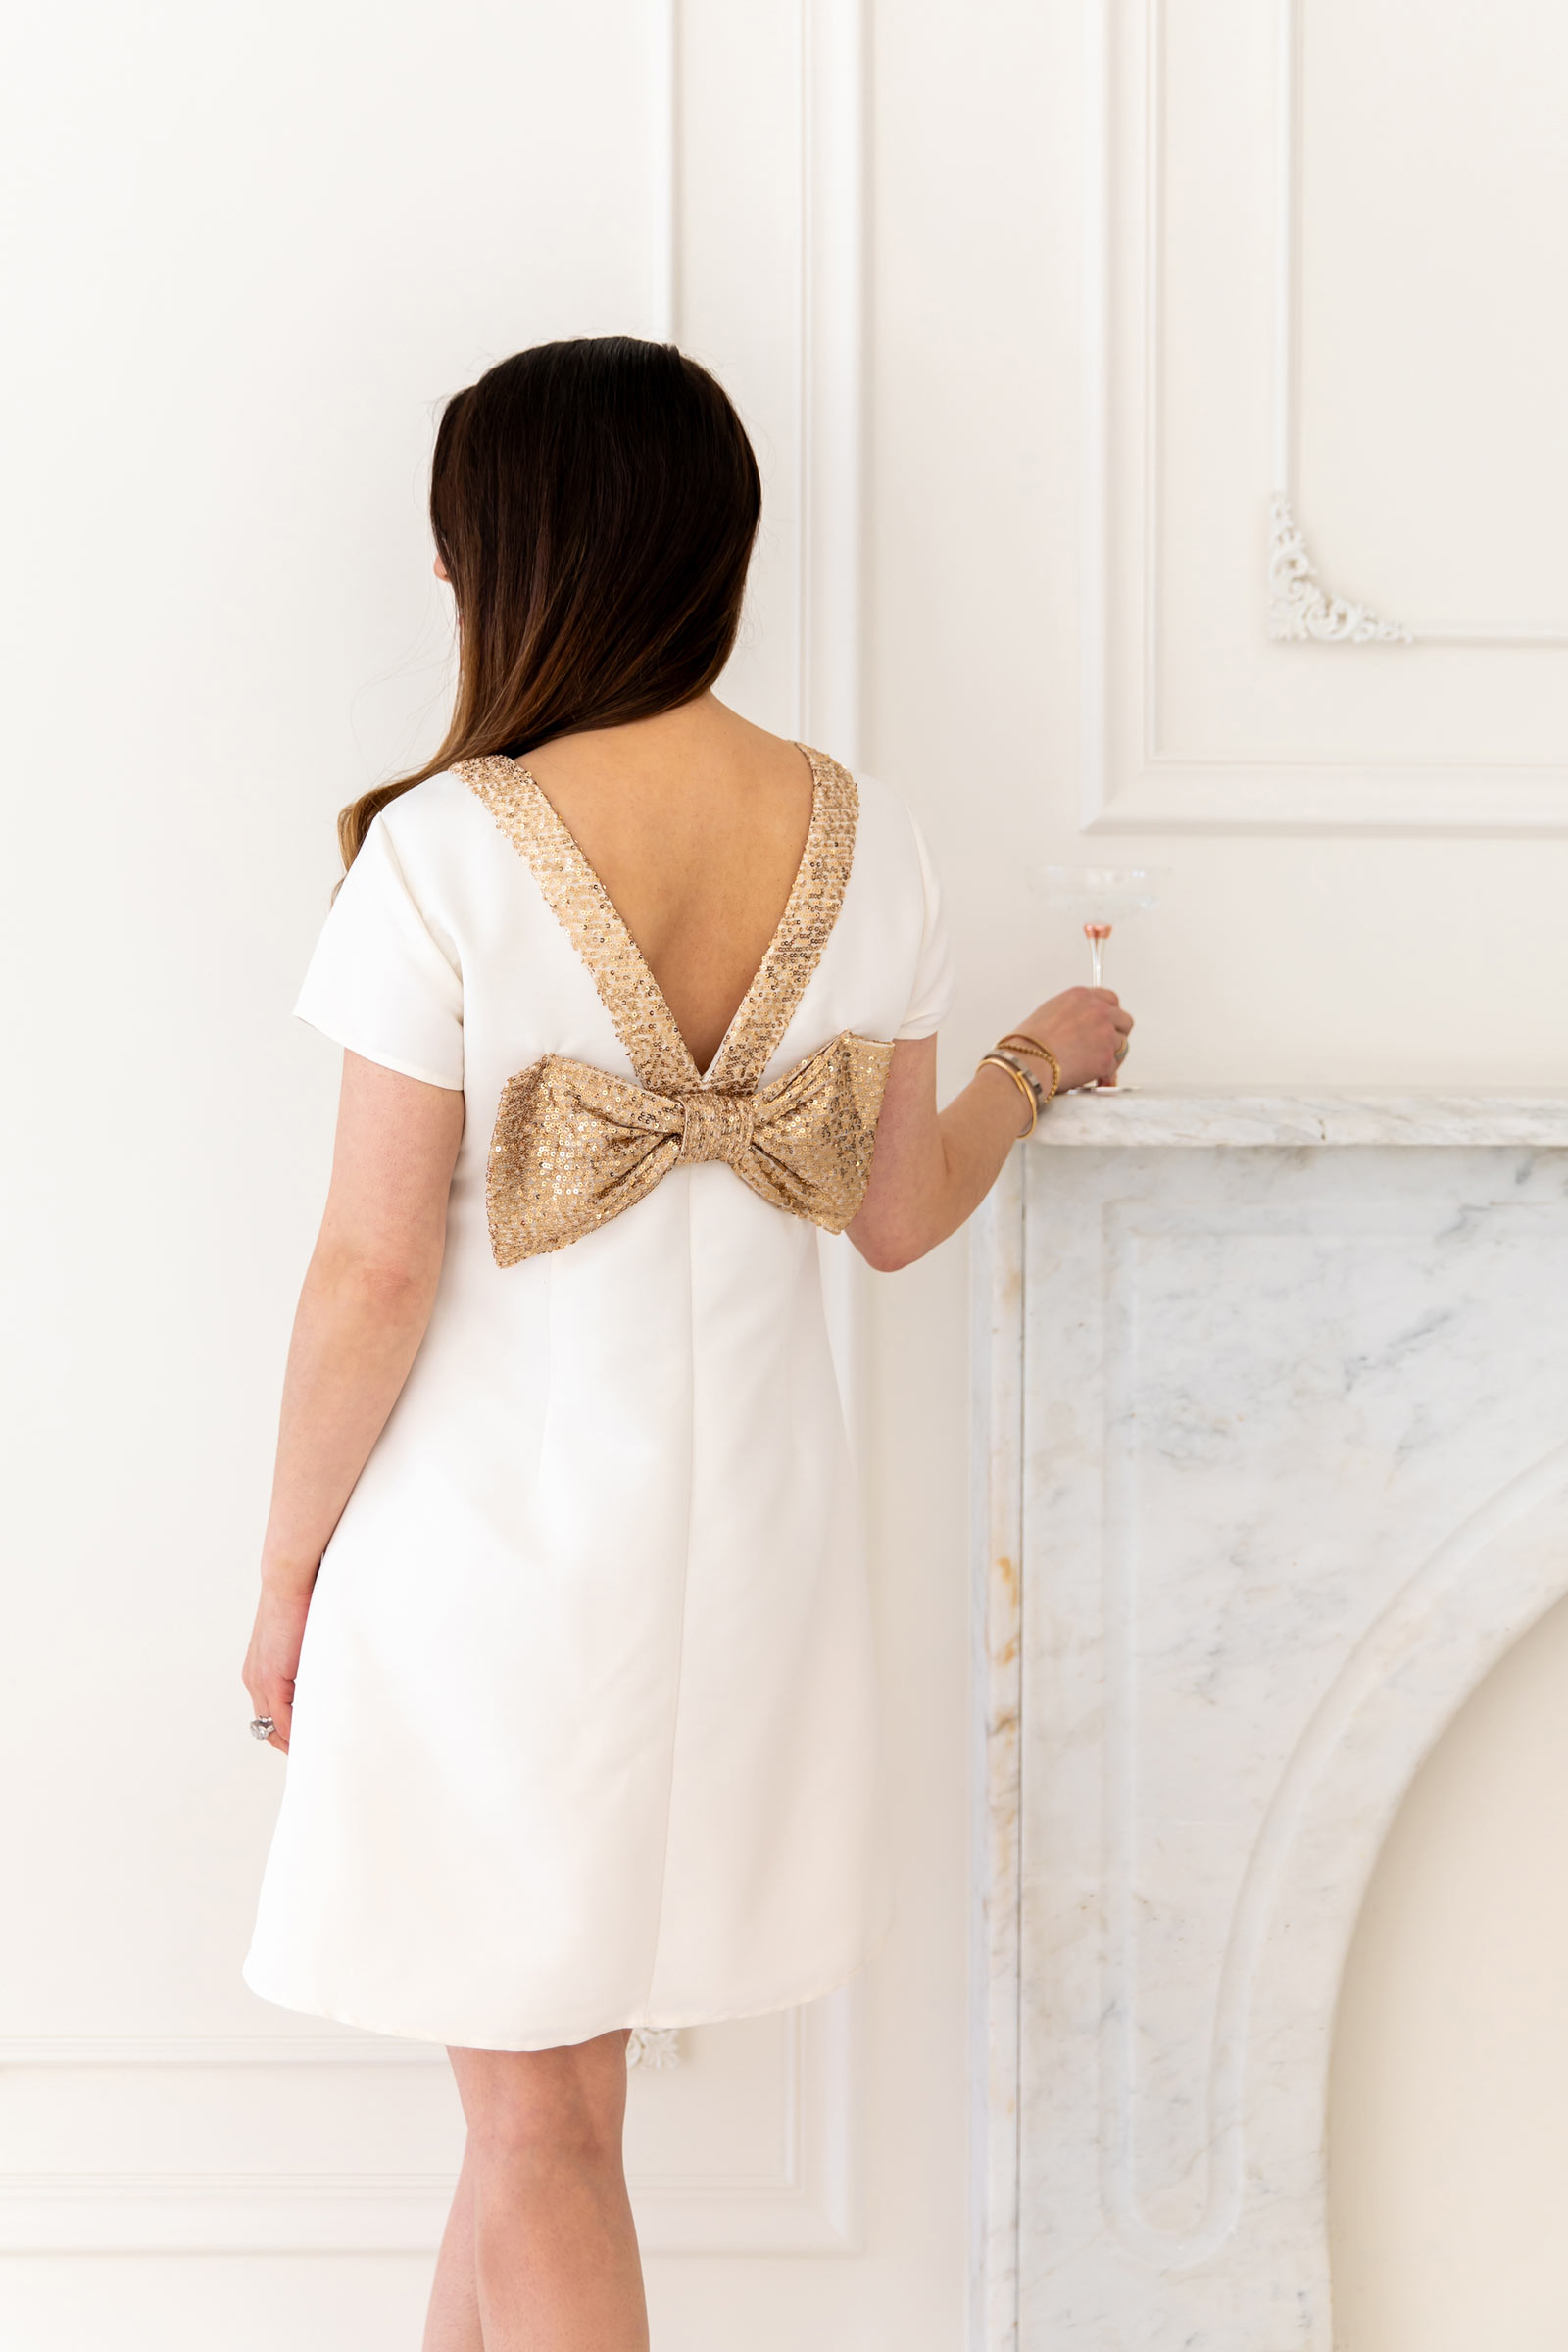 Sail to Sable Style Charade Allie Bow Back